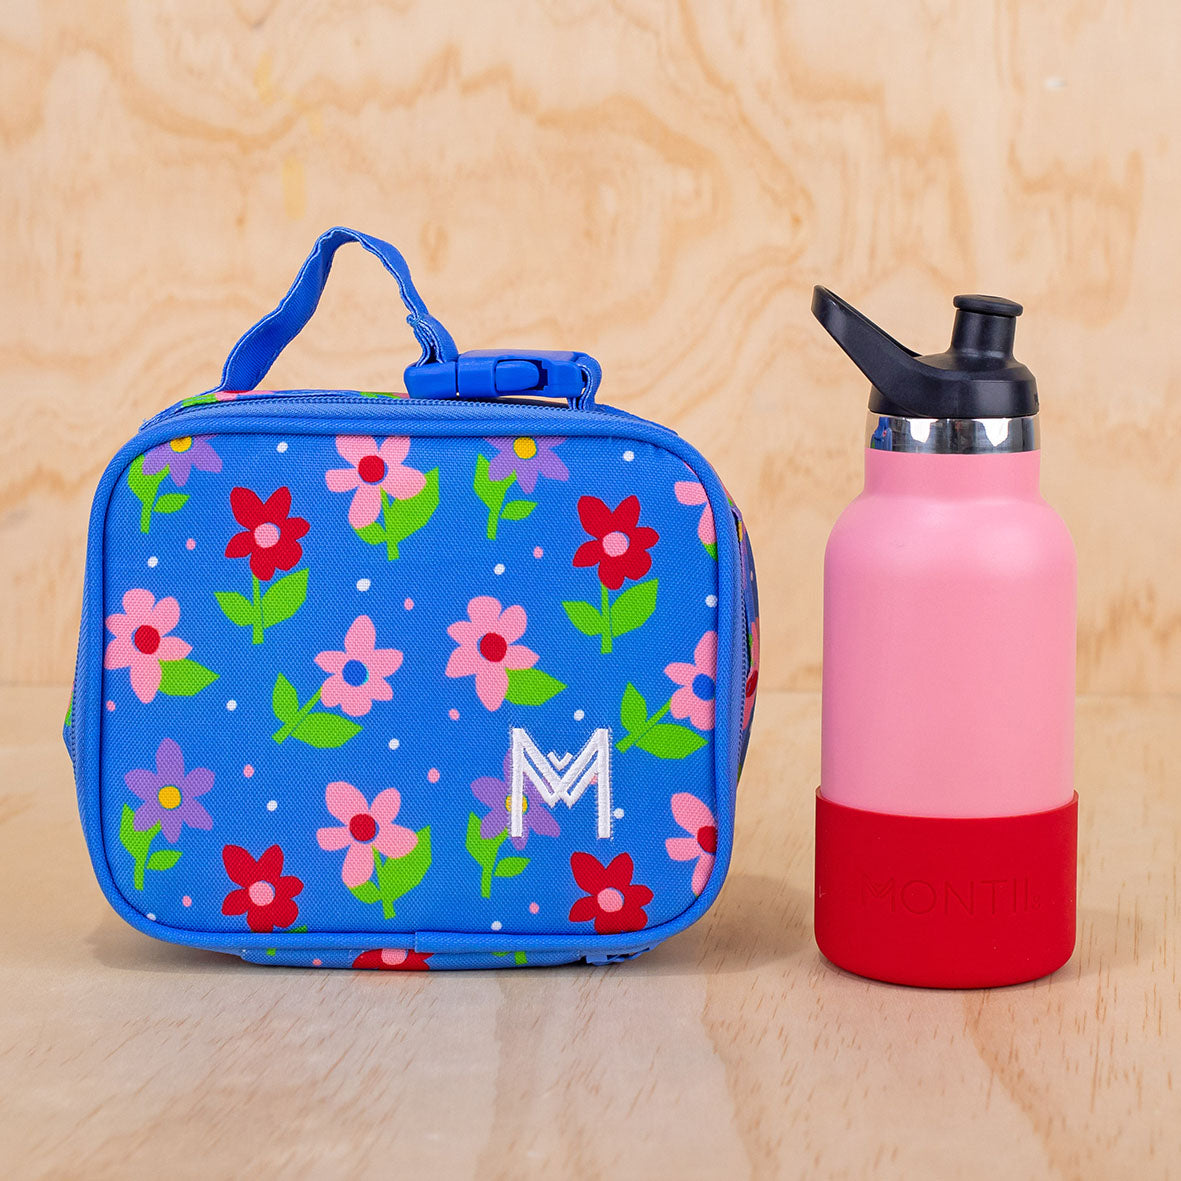 Montii.Co Mini Insulated Lunch Bag - Petals 